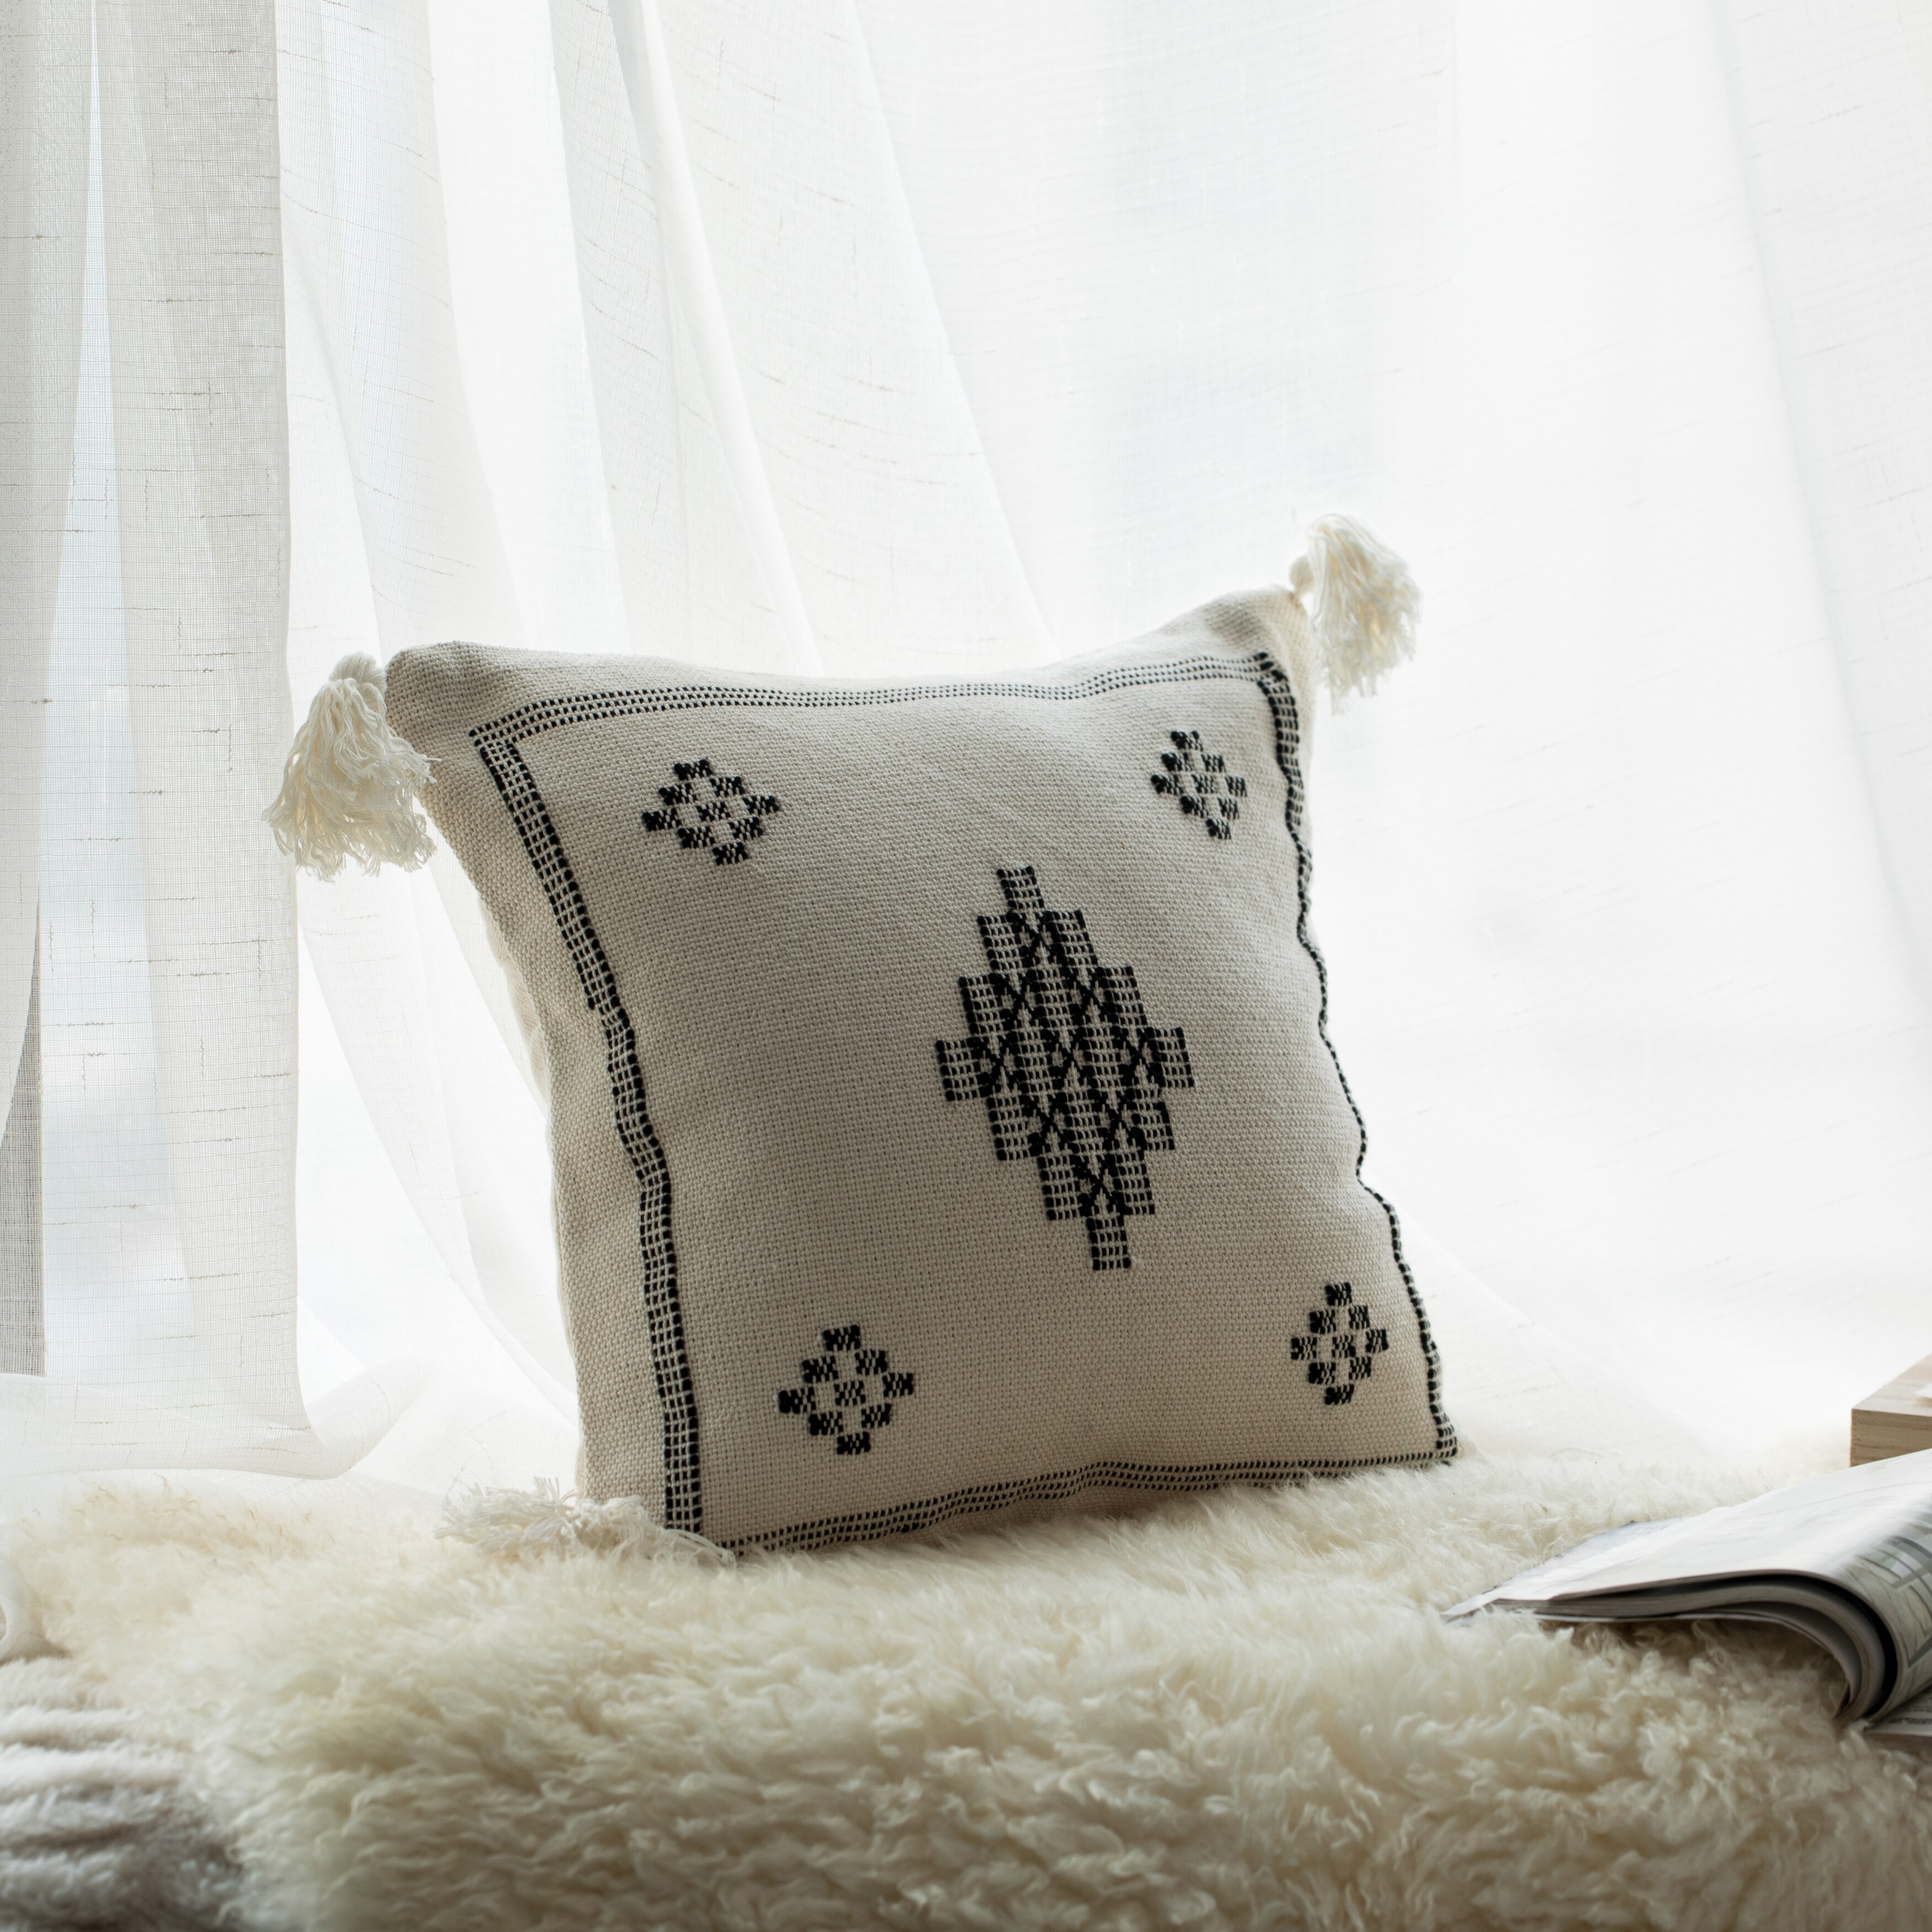 Deerlux 16 Handwoven Cotton Throw Pillow Cover with Small White Tufted Diamond Pattern and Tassel Corners, White